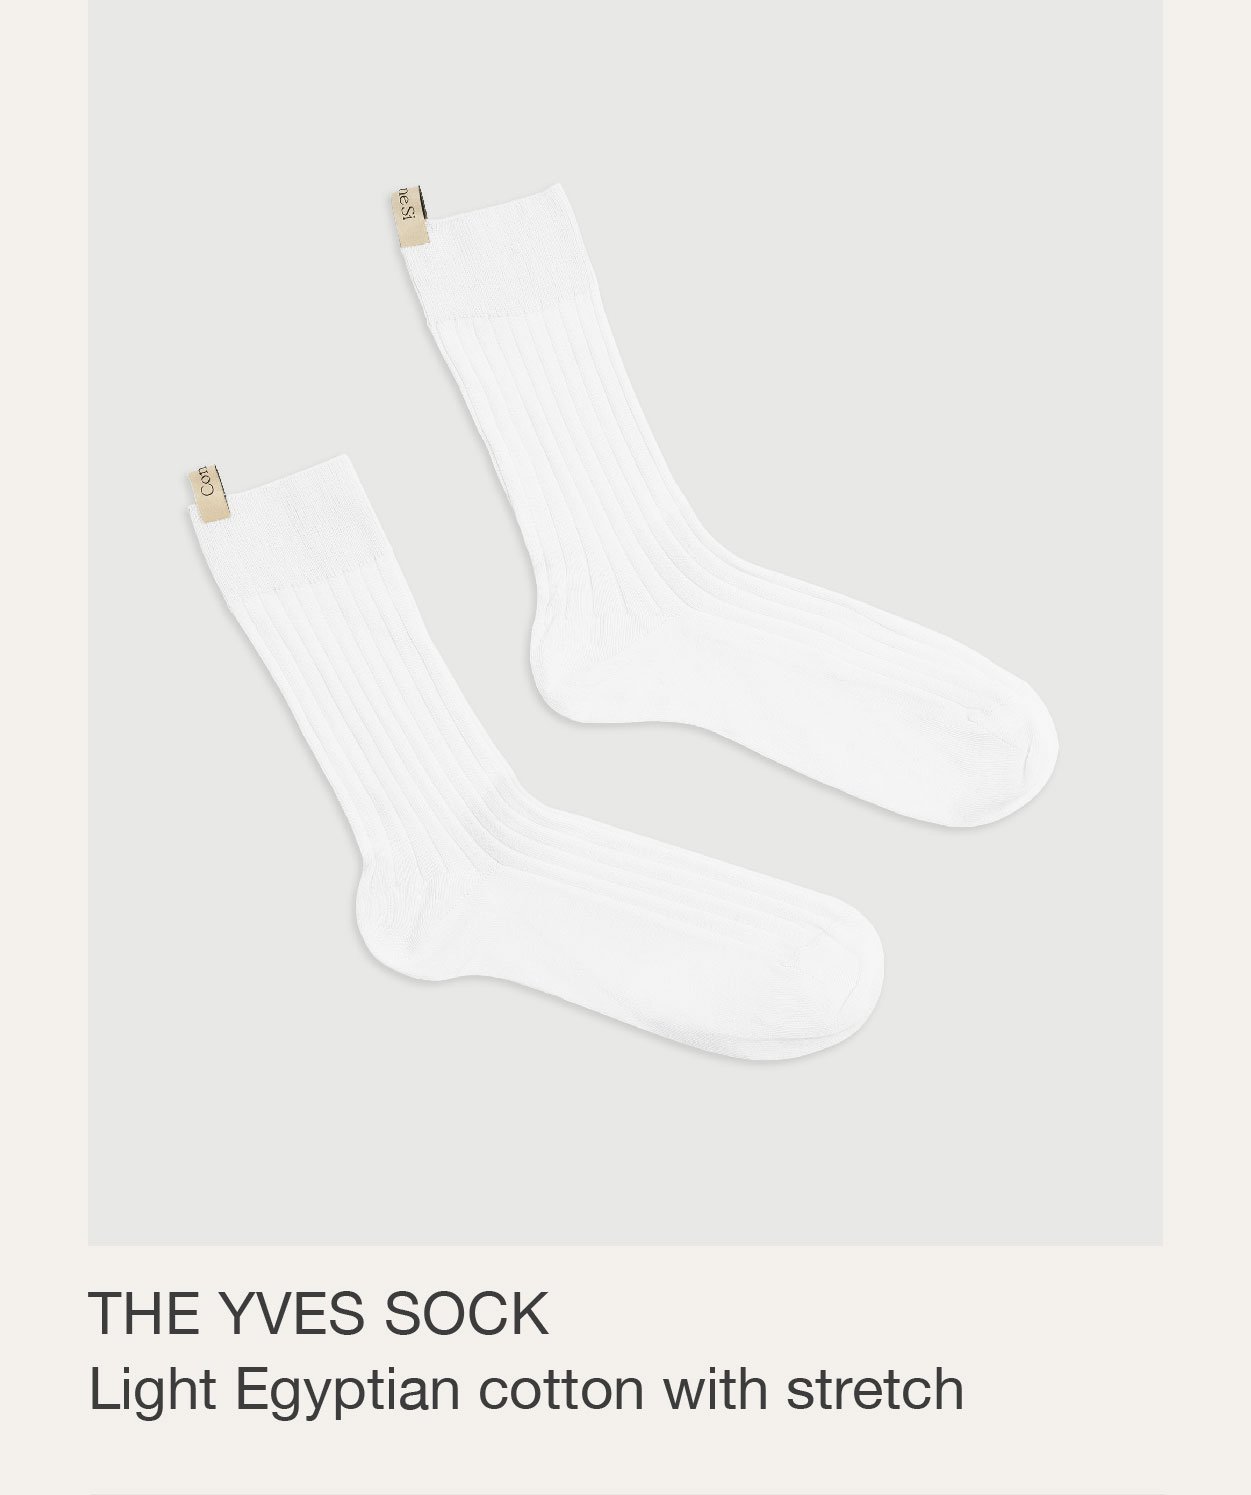 The Yves Sock. Light Egyptian cotton with stretch